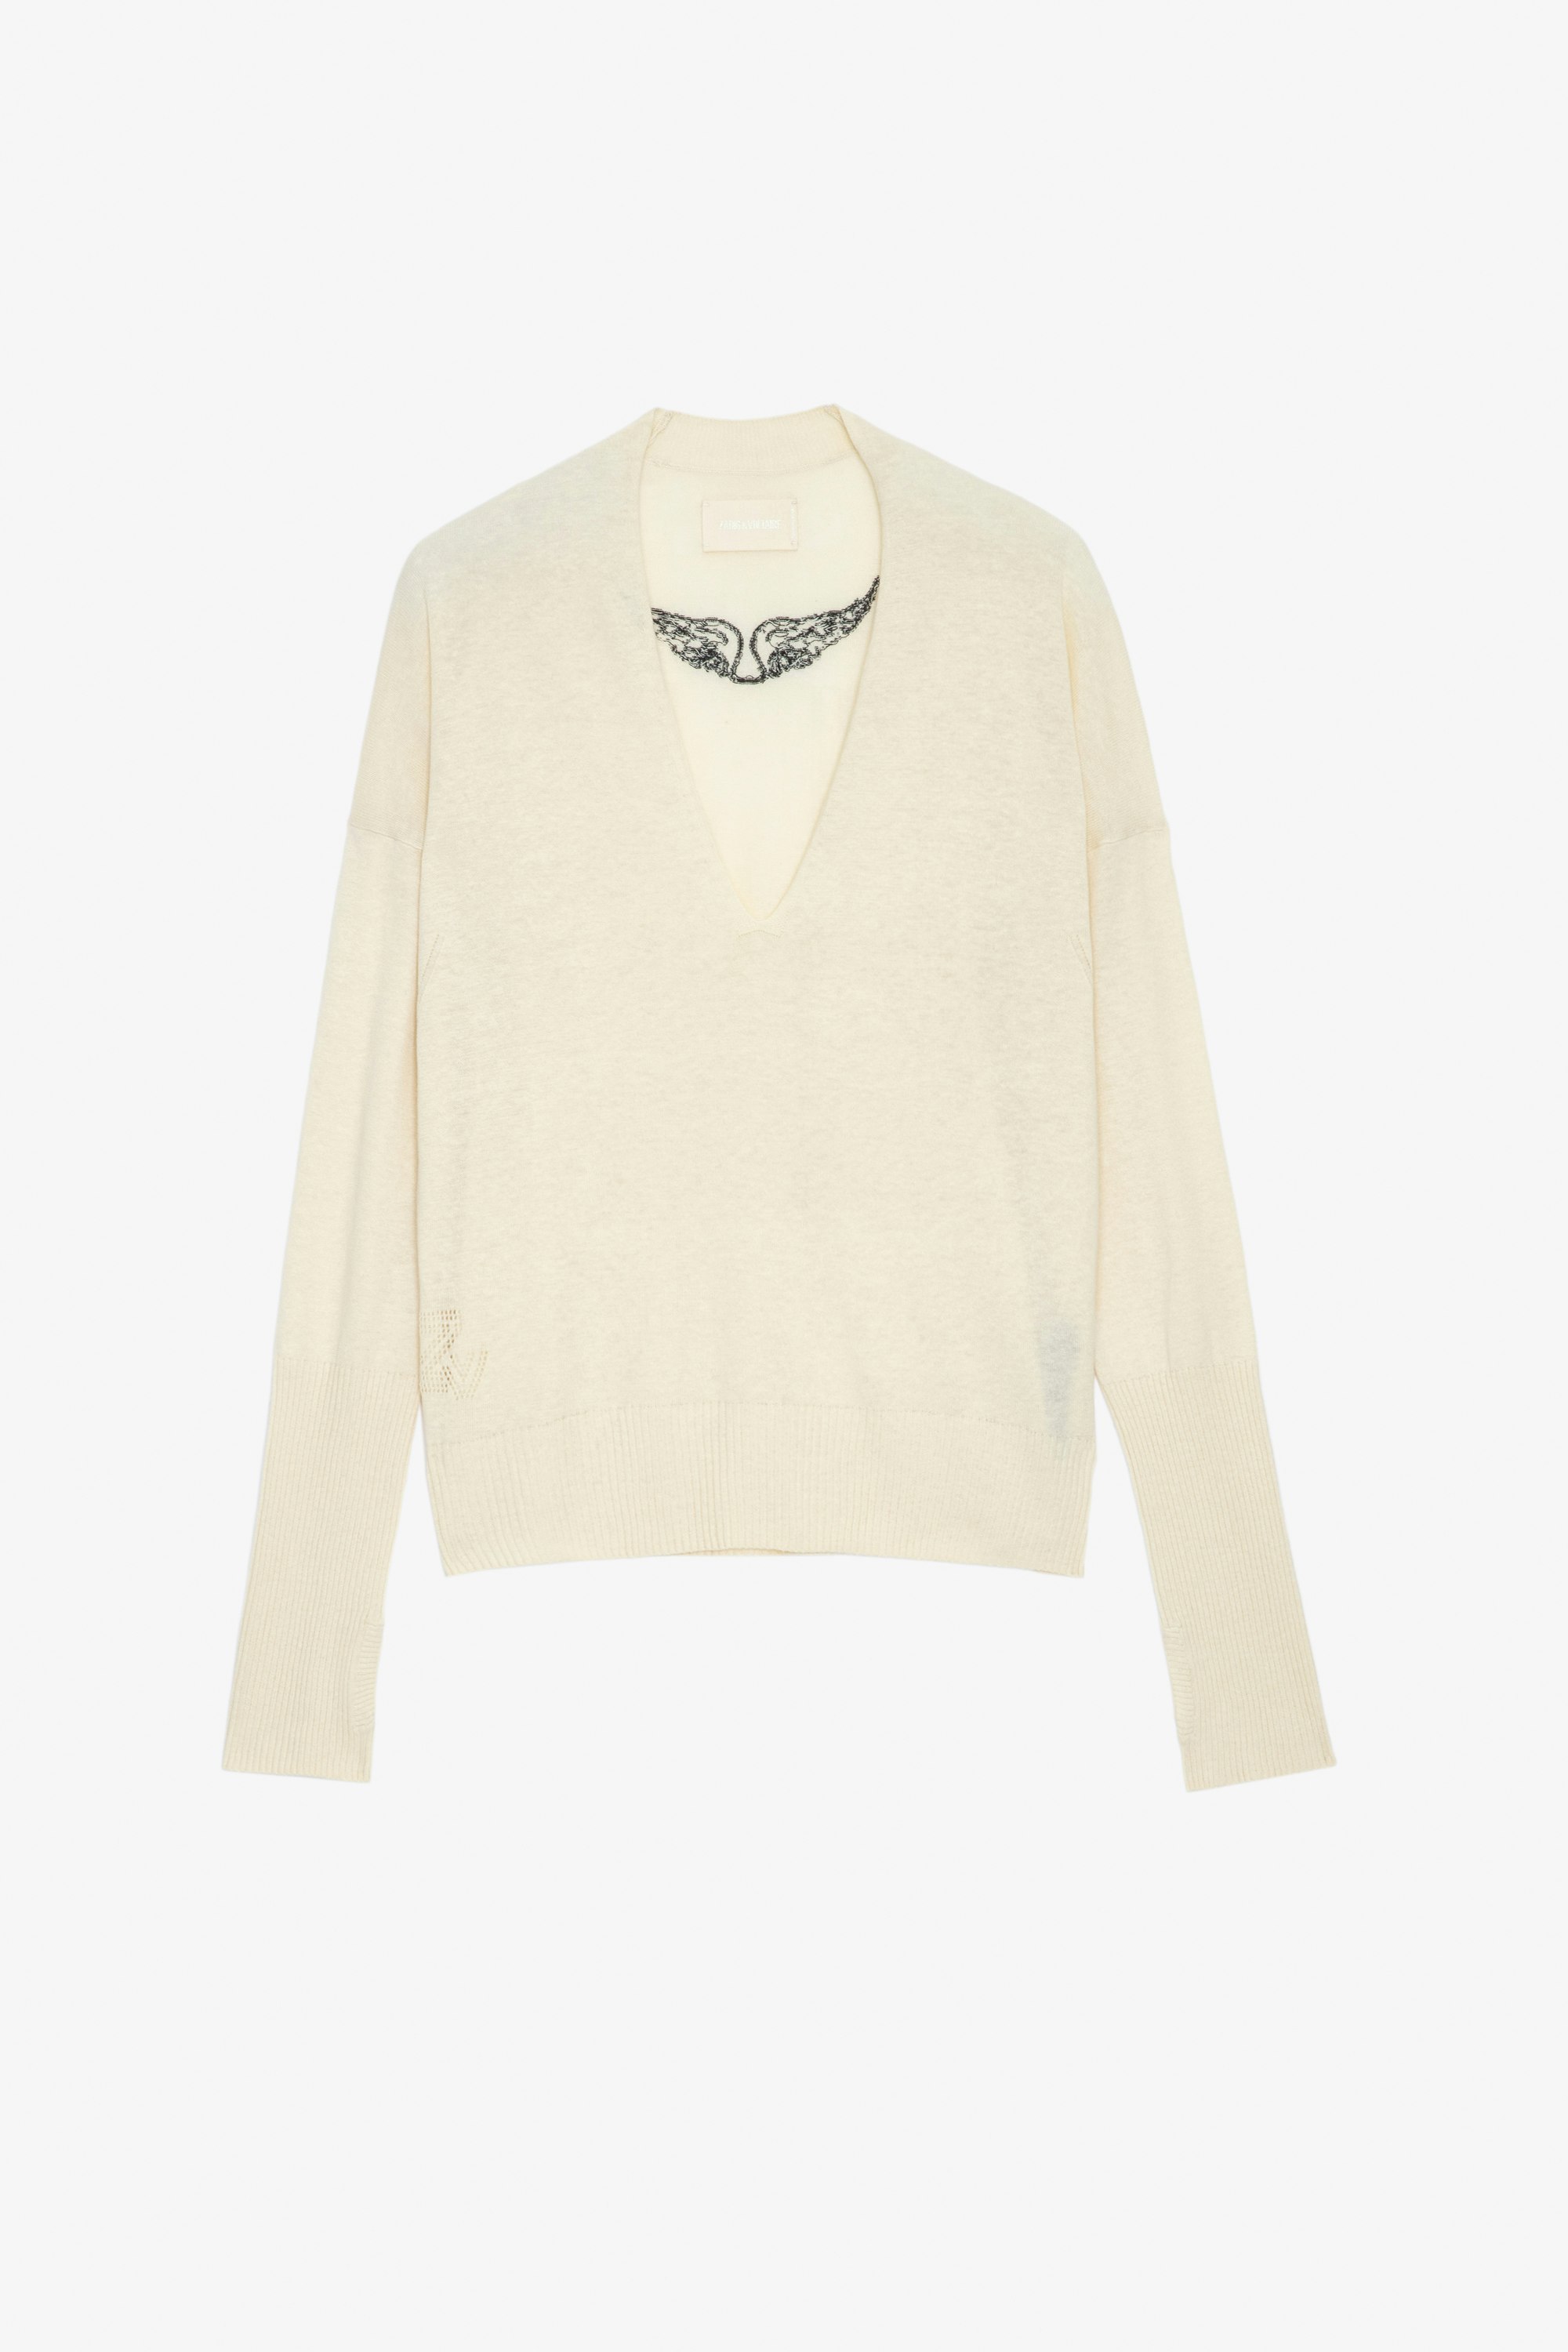 Danna Pullover Women's off-white cotton and linen pullover with wings on the back